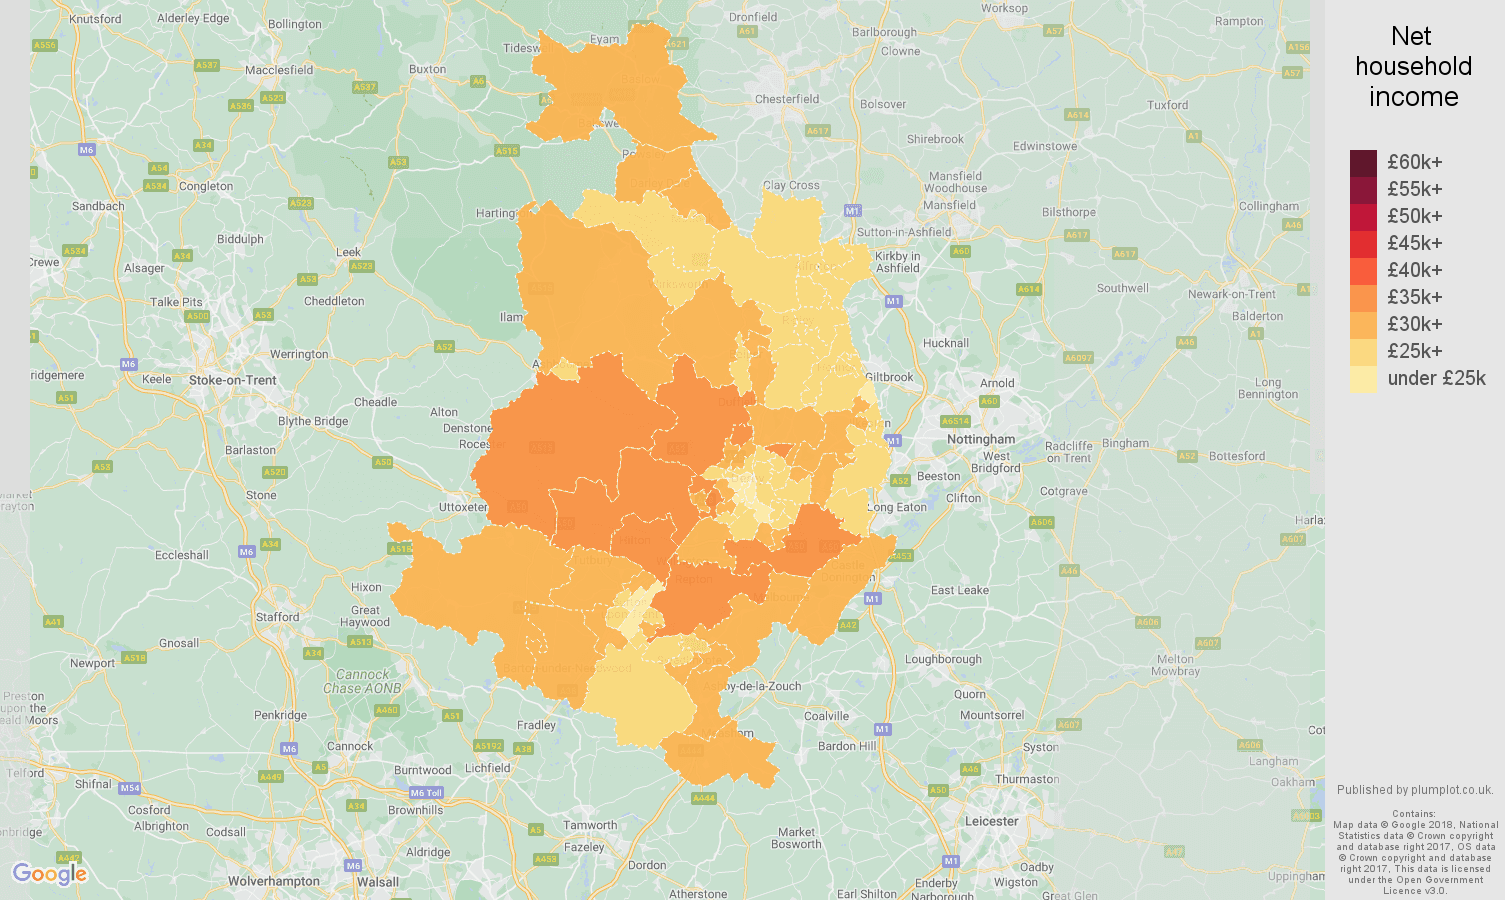 Derby net household income map